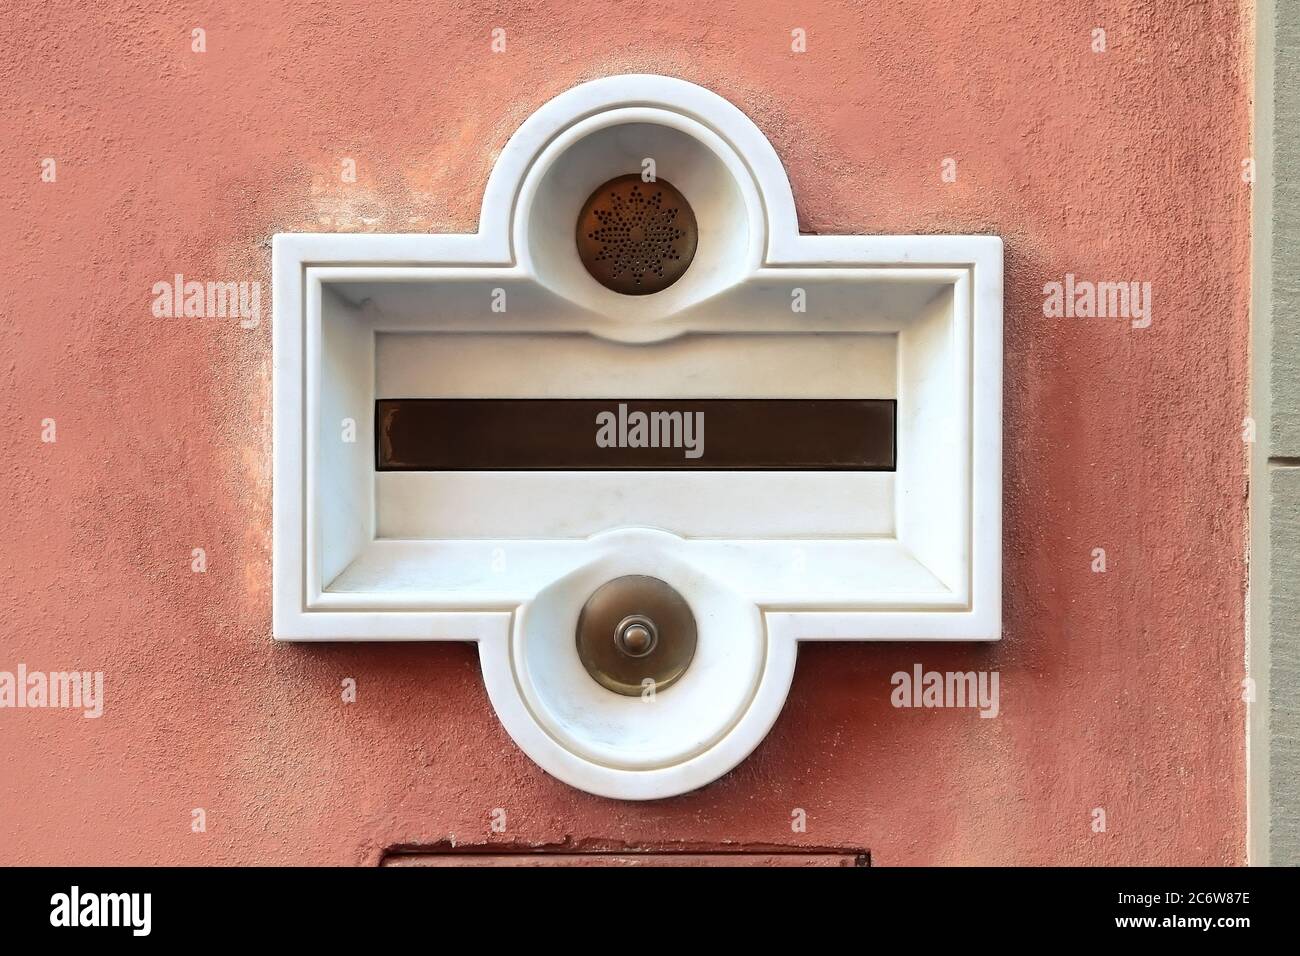 Decorative element. Vintage marble built-in mailbox with brass button and speaker. Pisa. Italy. Stock Photo